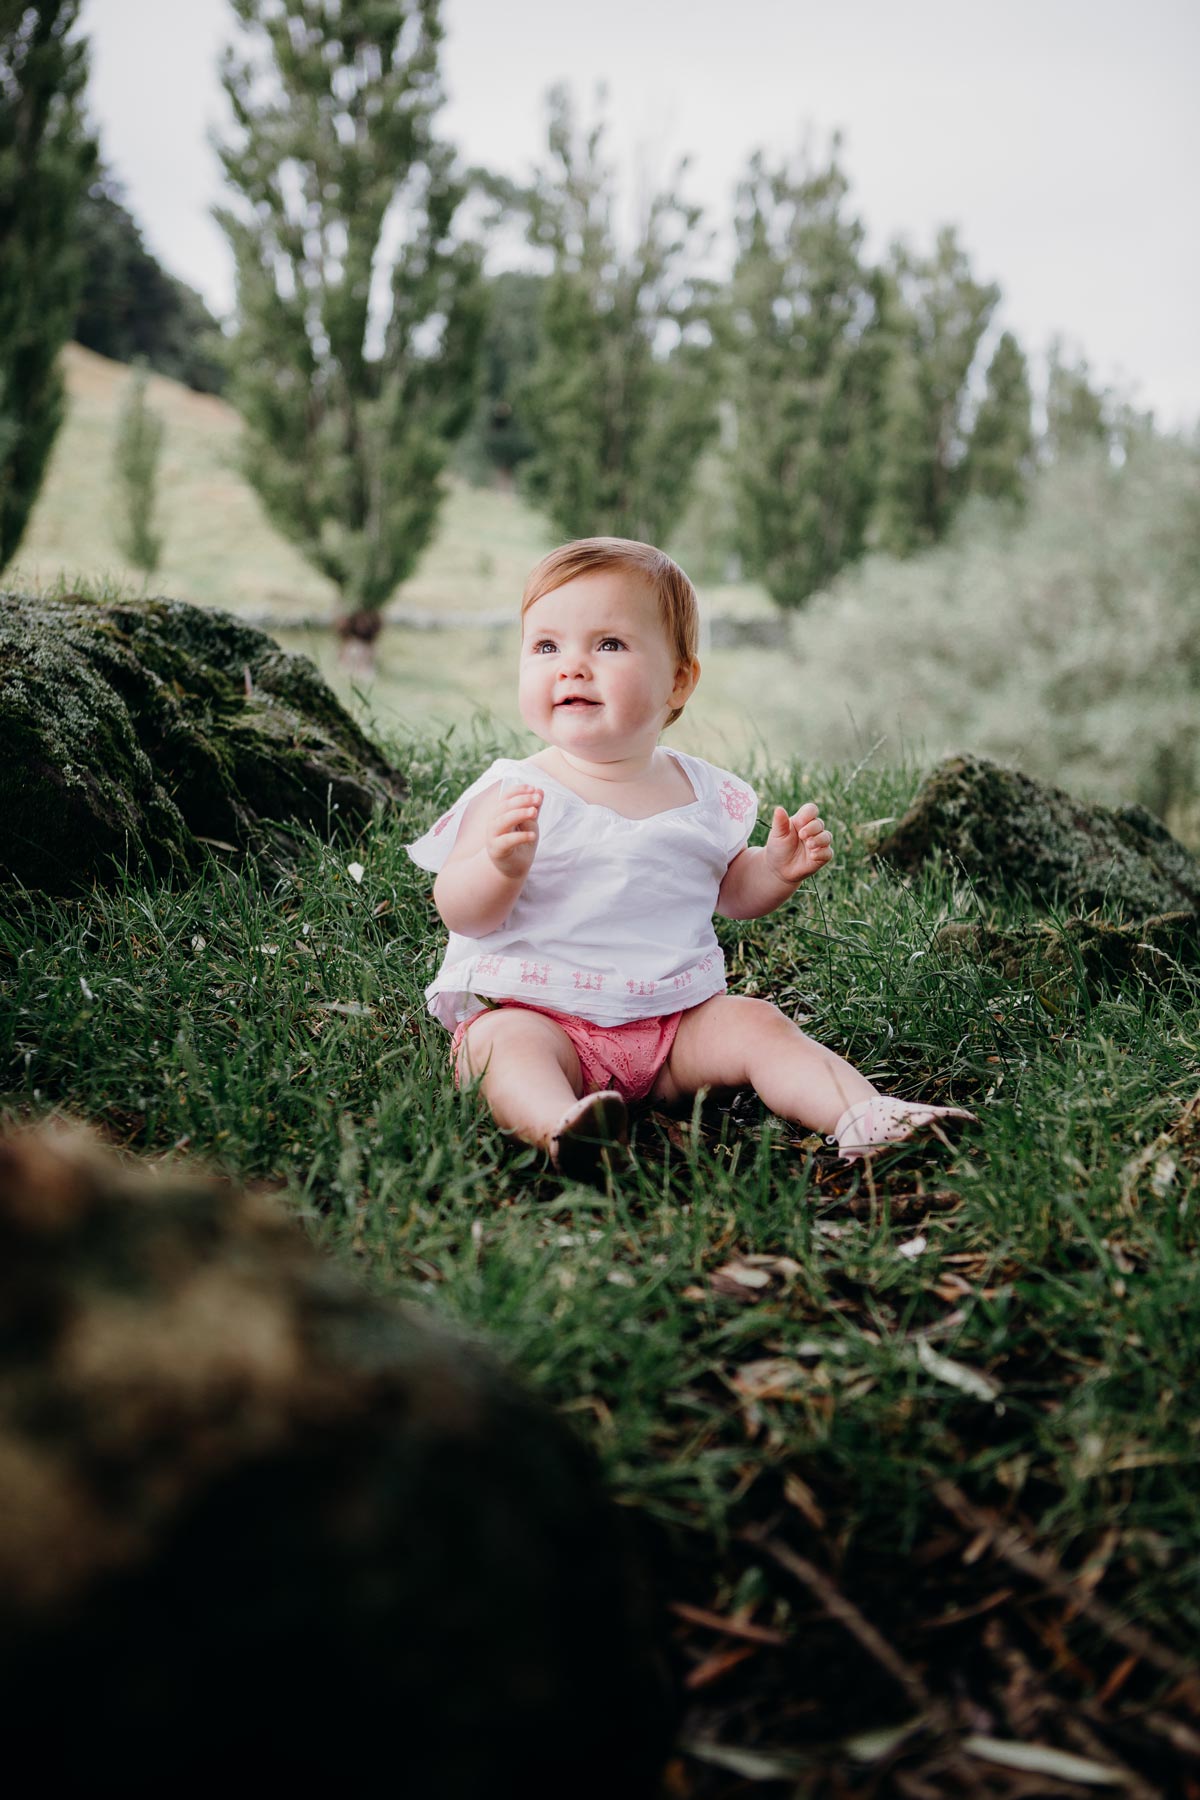 family photos spring lifestyle baby portrait photoshoot session in cornwall park auckland by sarah weber photography